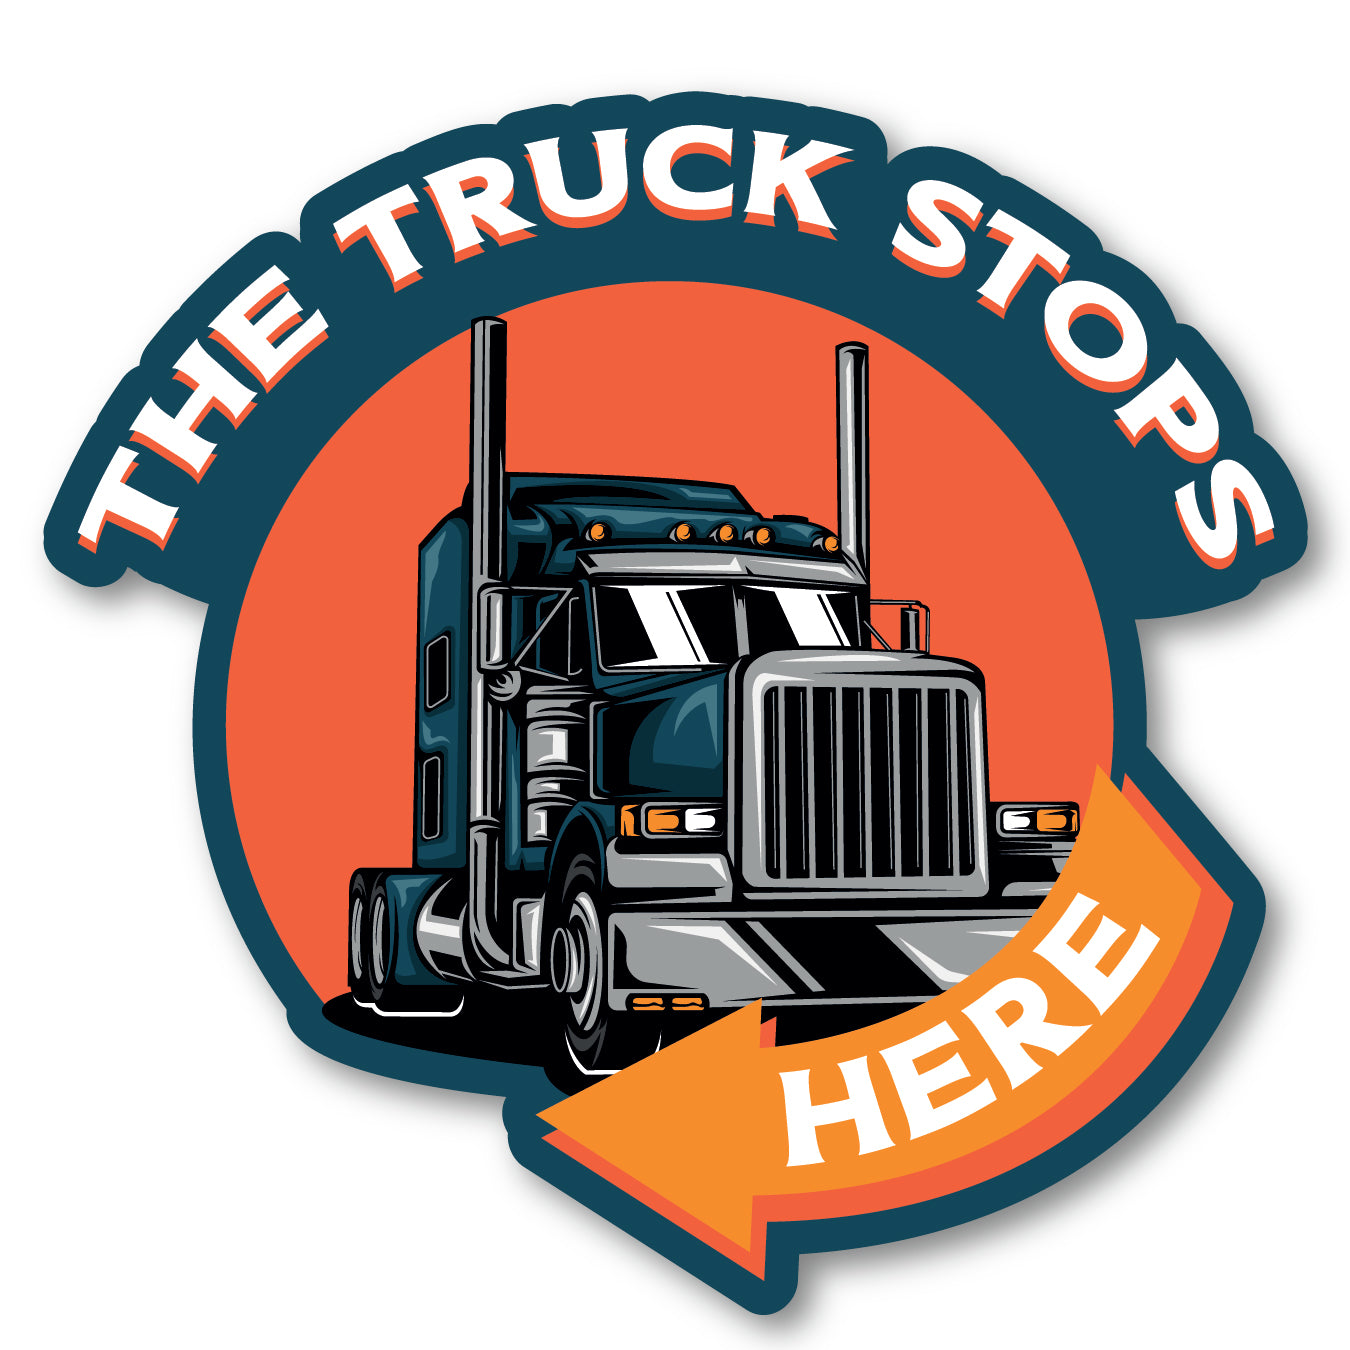 DP5-014 | The Truck Stops Here